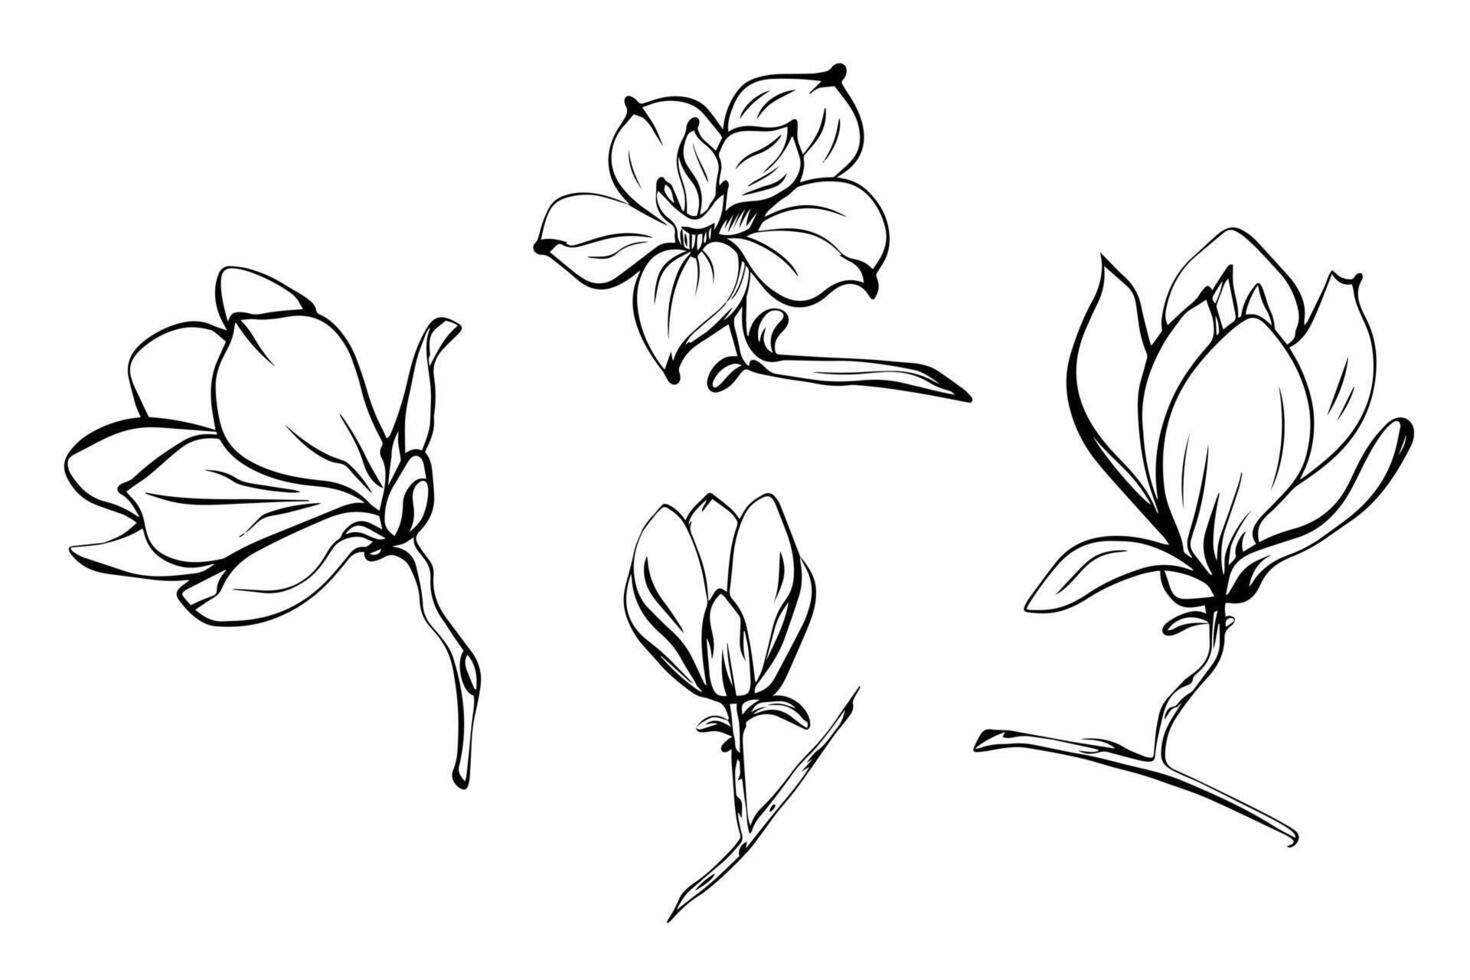 Set of Magnolia in sketch style, hand-drawn isolated on white background. Floral sketch for print designs, signage, flower shops, logos in black and white. Coloring book. vector